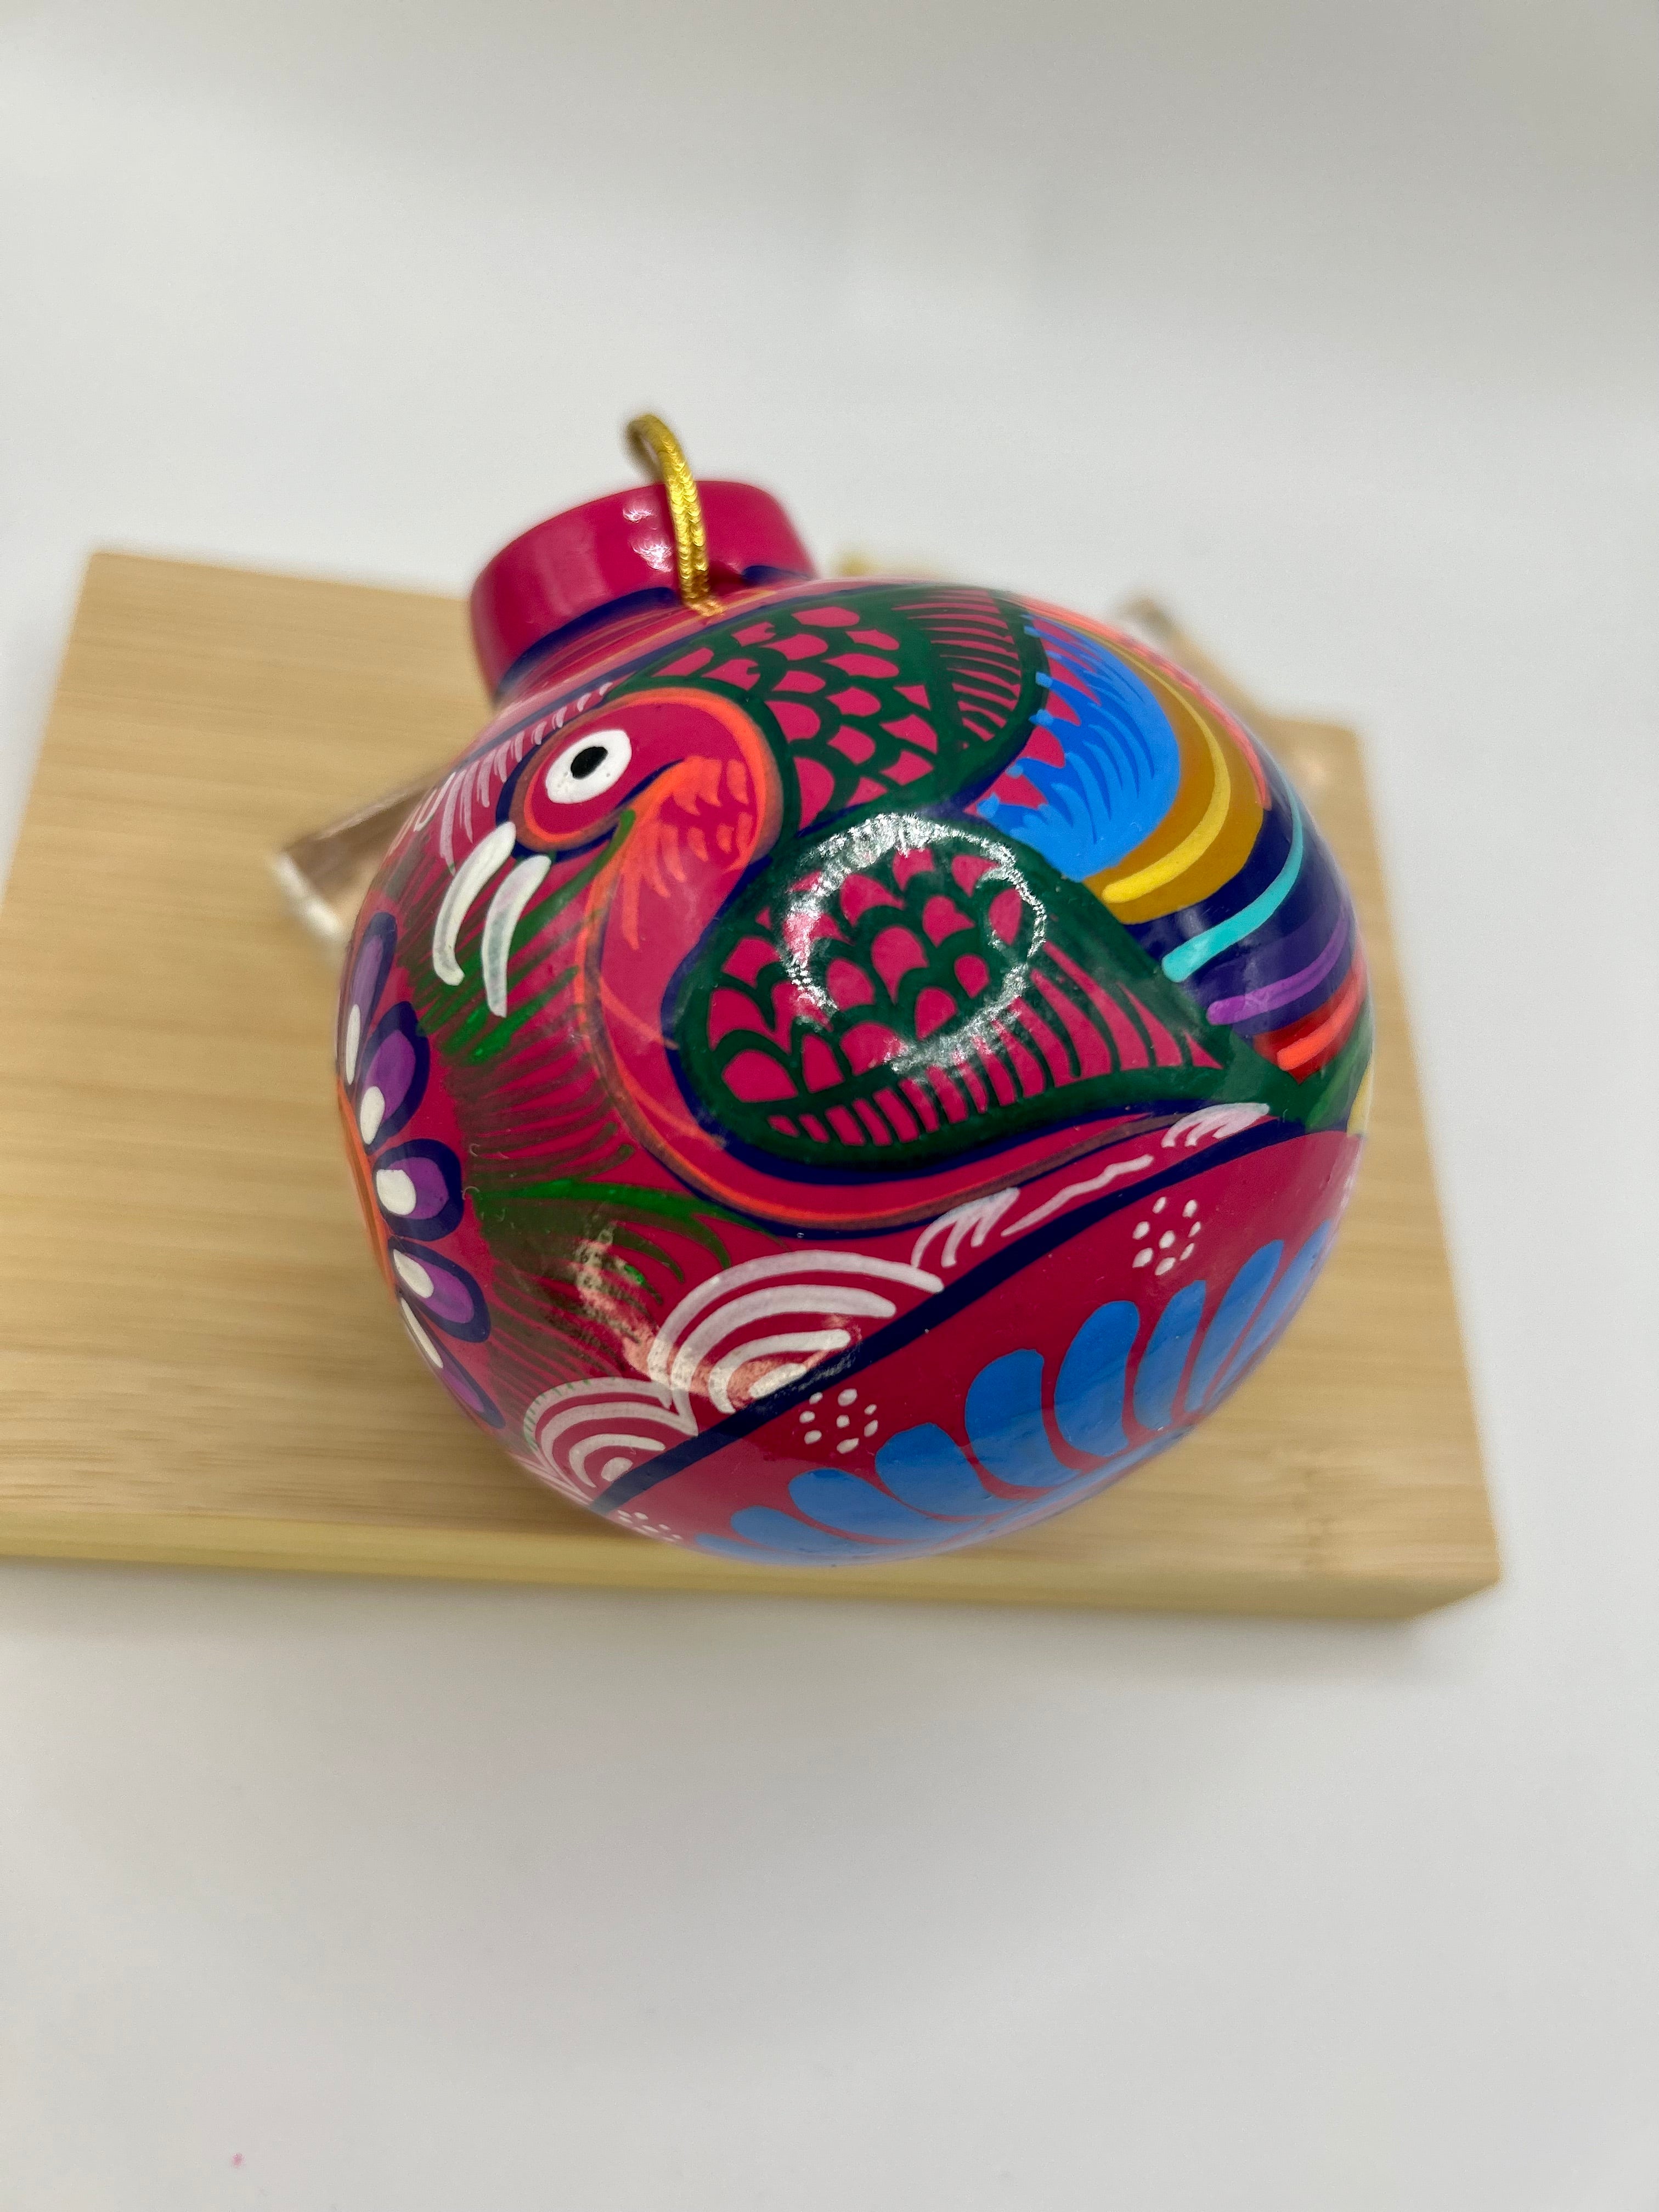 MEXICAN ORNATE HAND PAINTED CLAY ORNAMENT